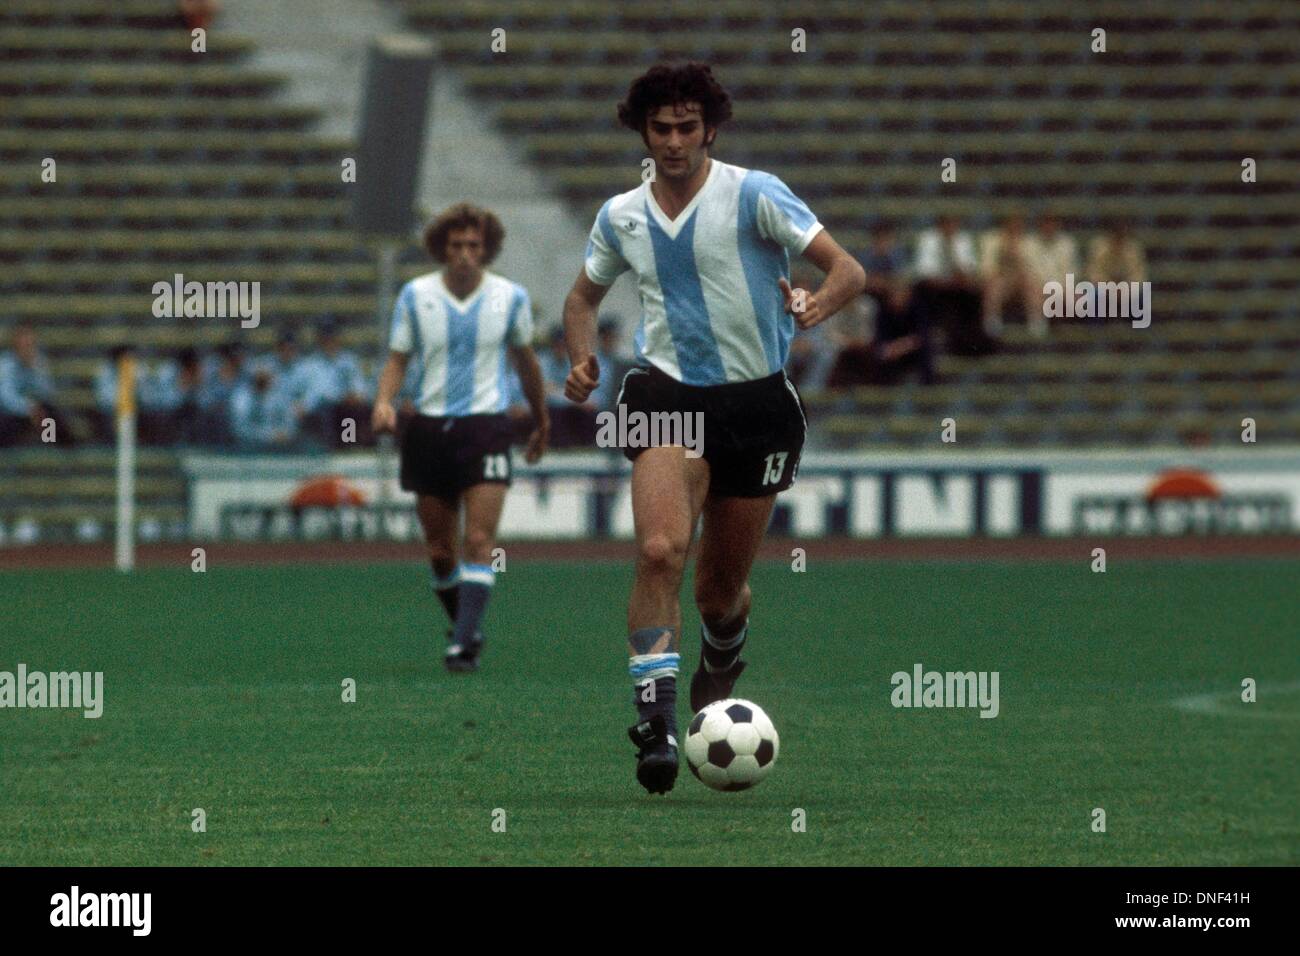 23061974-germany-1974-world-cup-finals-mario-kempes-argentina-on-the-dnf41h.jpg